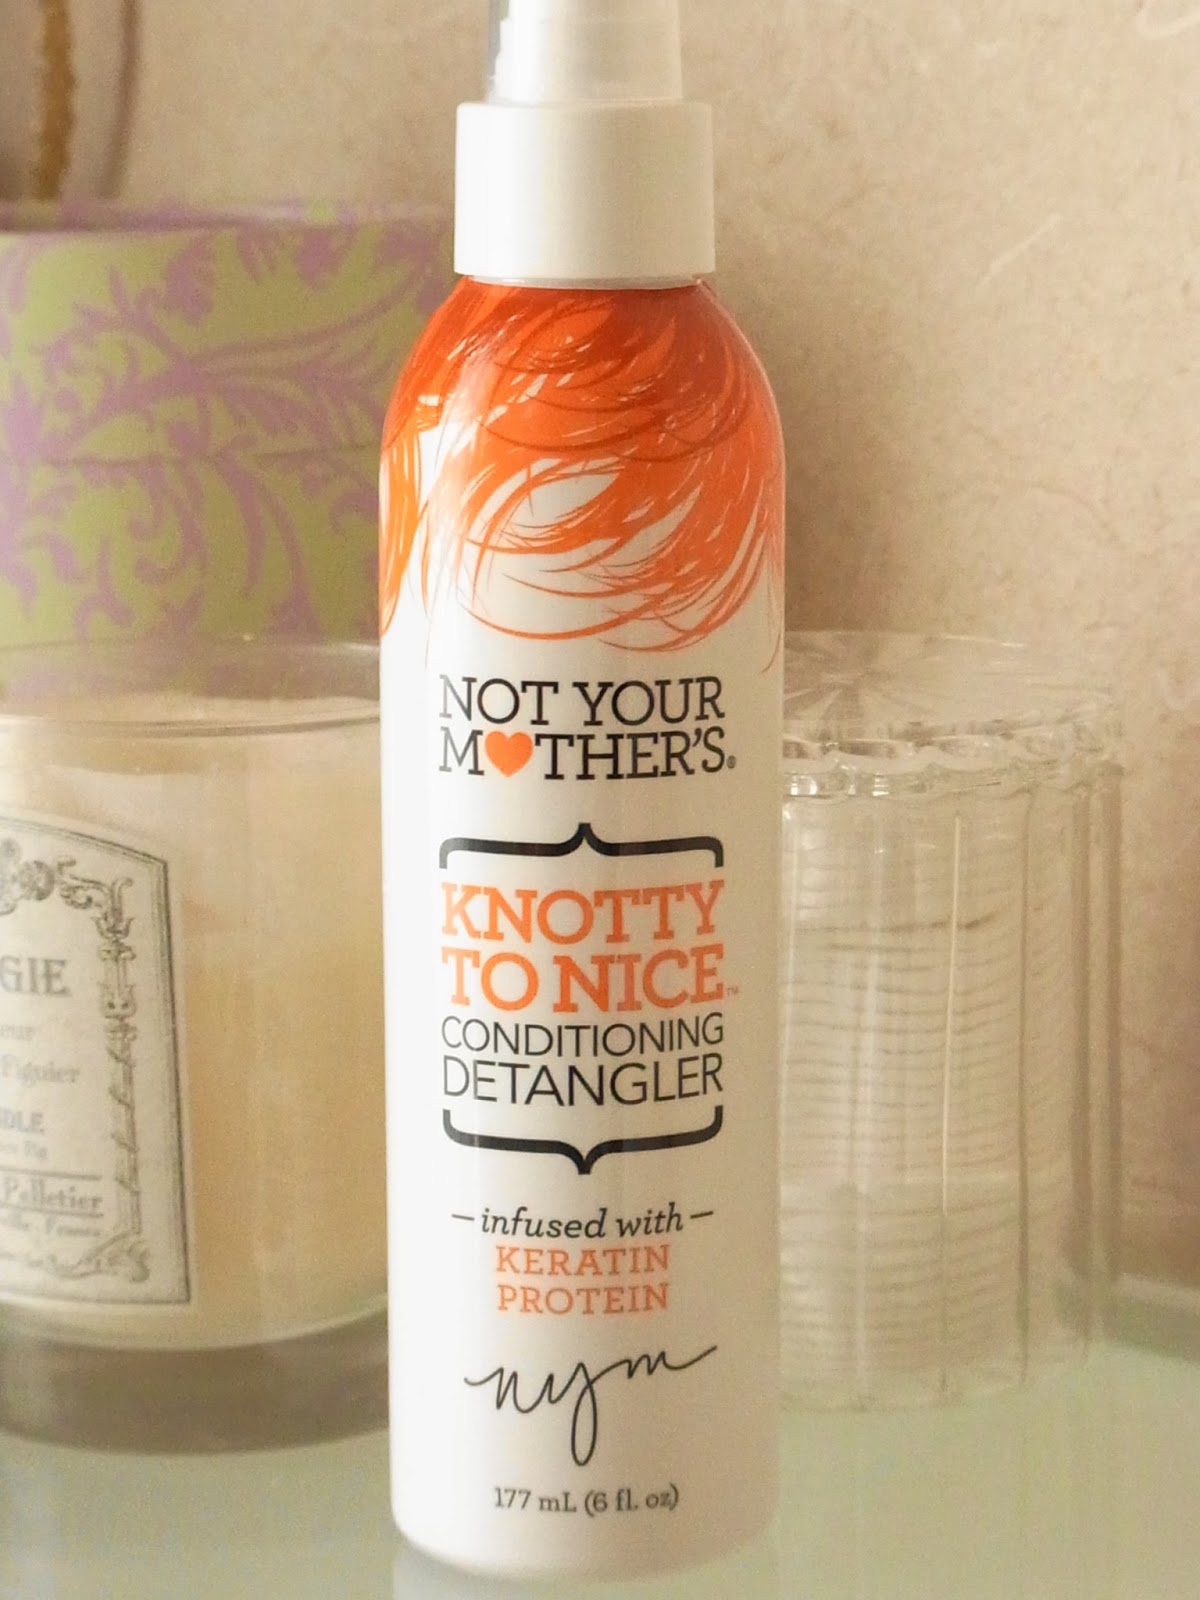 It's a 10 Miracle Leave In Conditioner - The Beauty Maniac in Tokyo